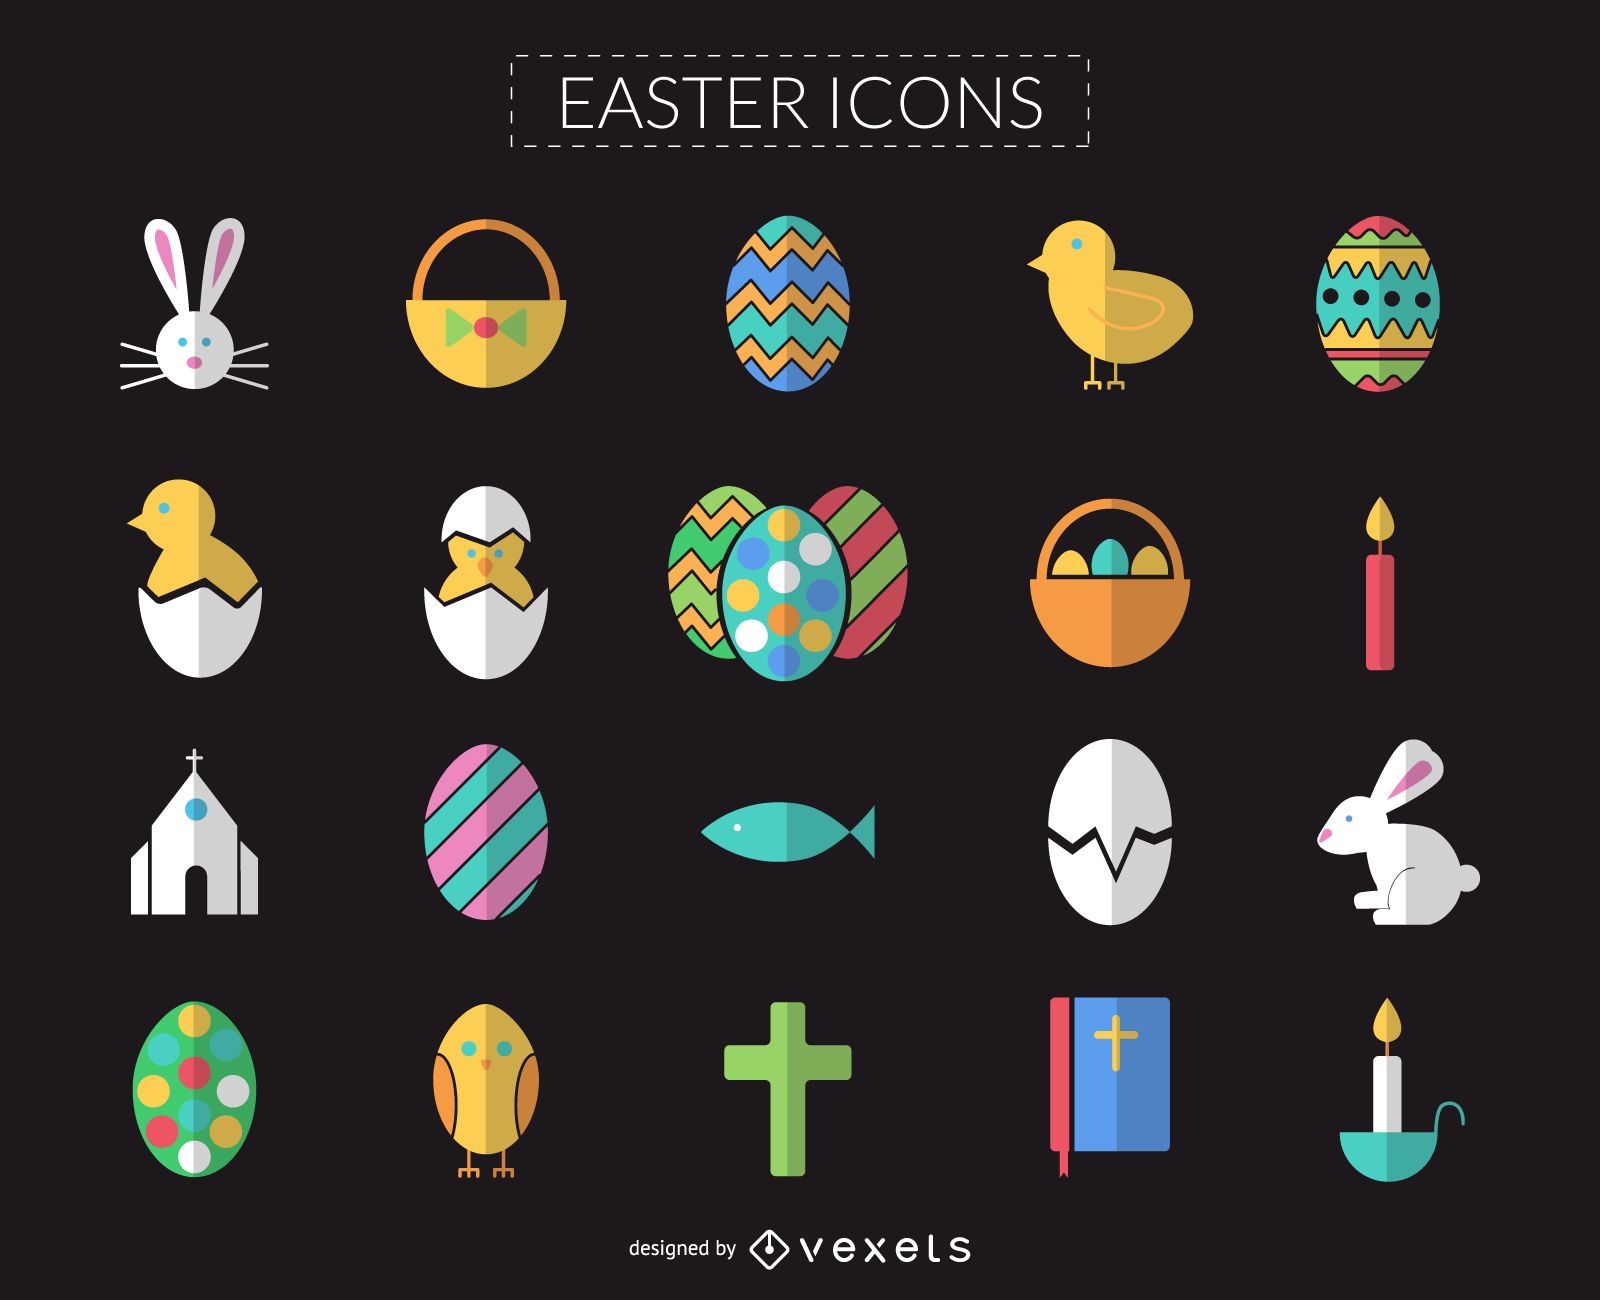 Flat and colorful Easter icon set